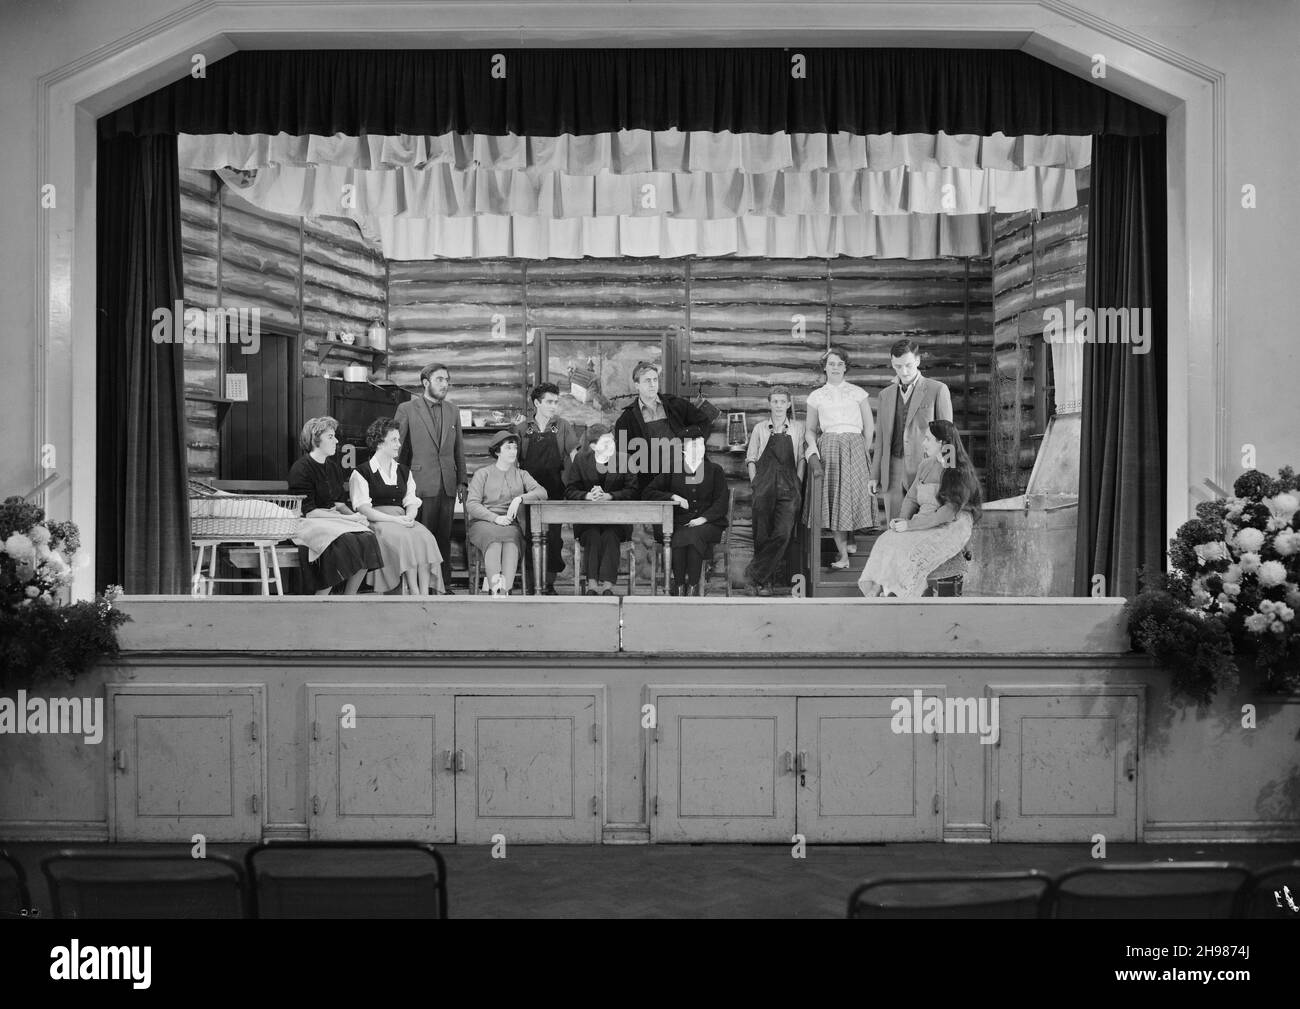 Goodwyn Hall, Mill Hill, Barnet, London, 21/10/1961. Members of the Dramatic Section of the Laing Sports Club on stage at Goodwyn Hall, performing their take on the play 'Johnny Belinda' by Elmer Harris. The Sports Club Dramatic Section performed the play 'Johnny Belinda' on the 19th, 20th and 21st October 1961 at Goodwyn Hall, Mill Hill. The play is set in the extreme north of Canada and tells the story of a young girl who is deaf. At the door donations raised a total of &#xa3;8 and 10s for the Royal Association in Aid of the Deaf and Dumb. This image was published in December 1961 in Laing's Stock Photo